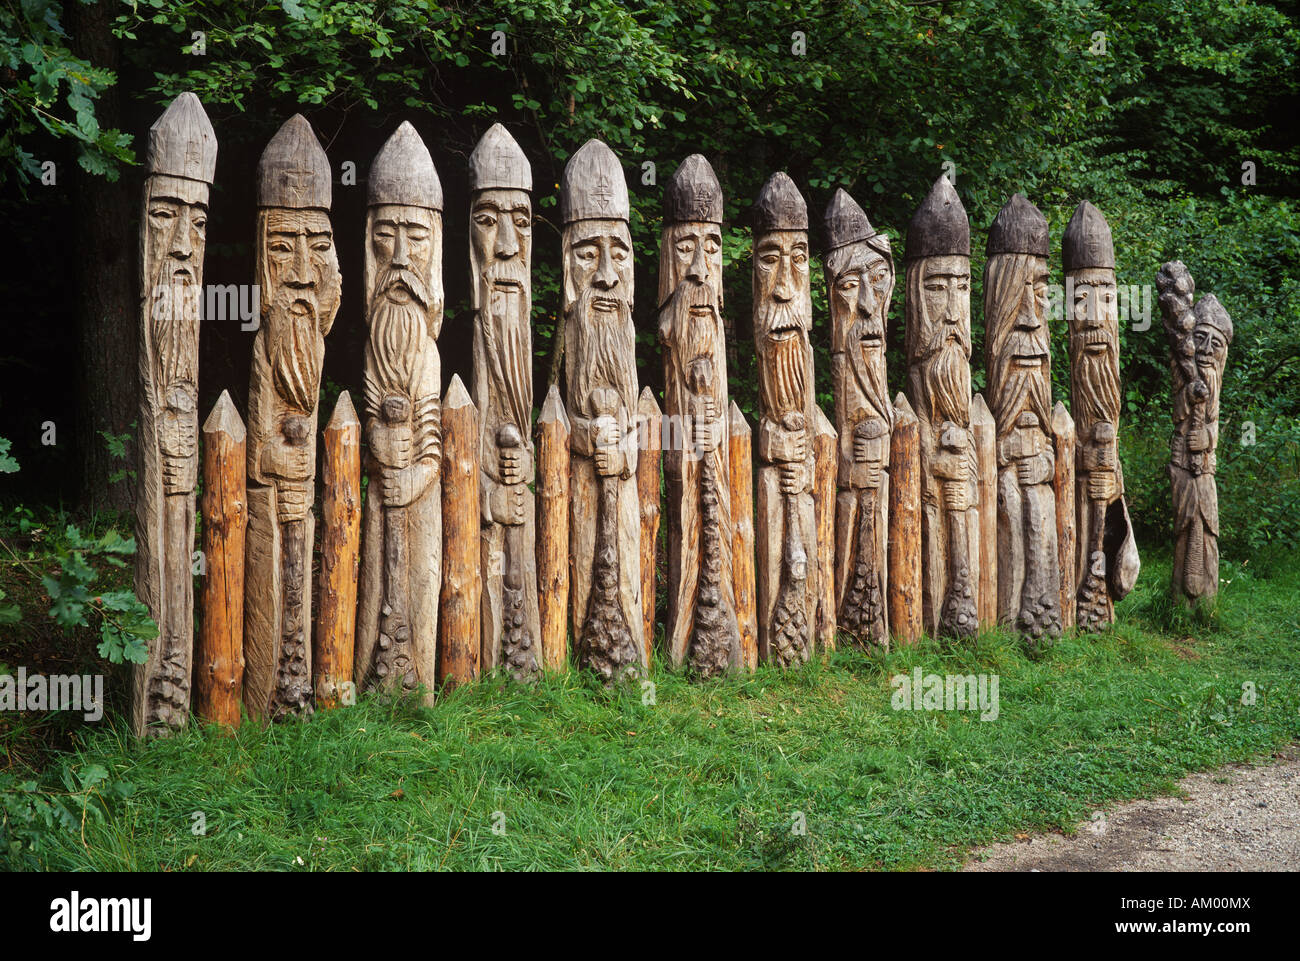 A dozen wooden brave of the pagan masurian tribes (Galindians), who were proselytized by the swords of the Teutonic Order. Stock Photo